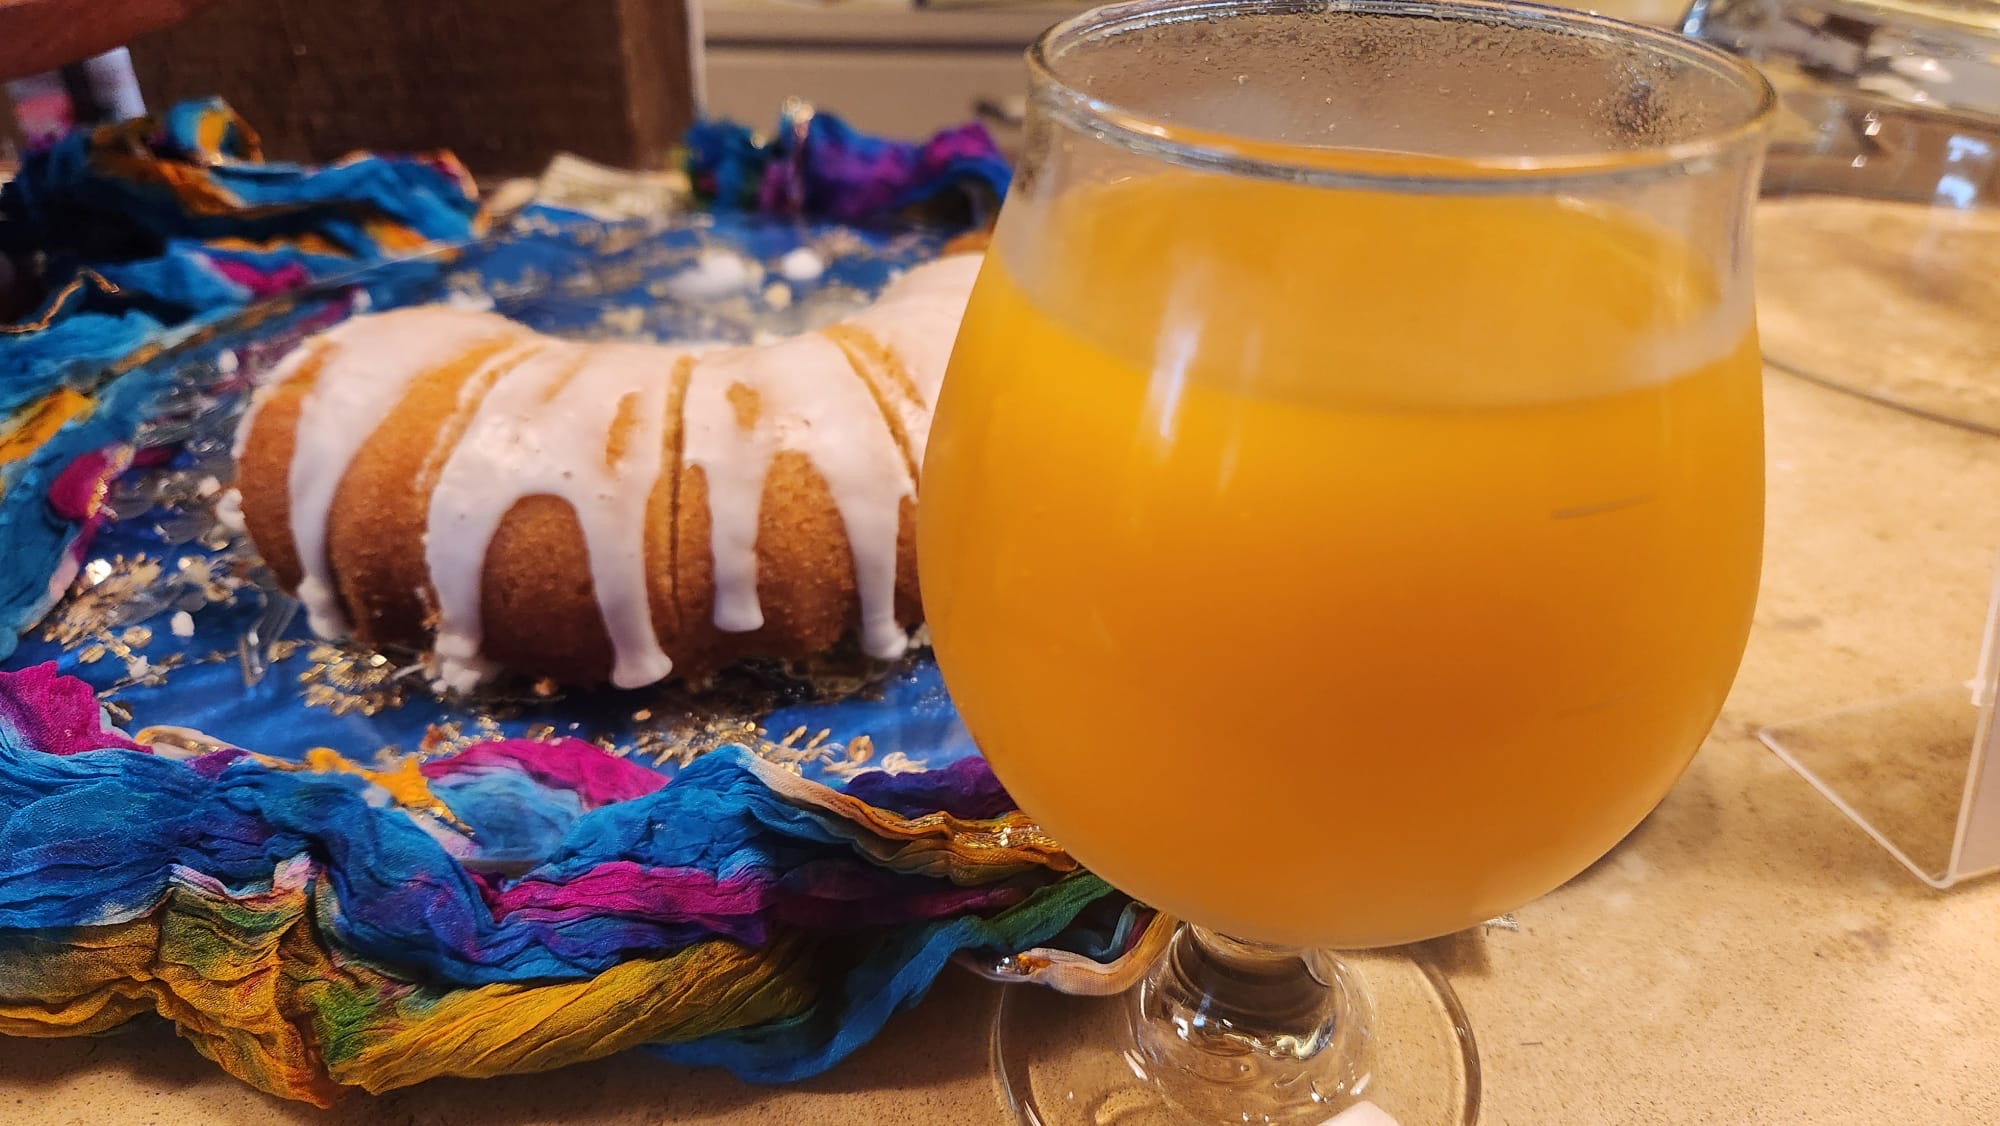 Roughhouse Brewing New Day Mango Lassi Sour Ale and spice cake, photo credit Justin Brummer